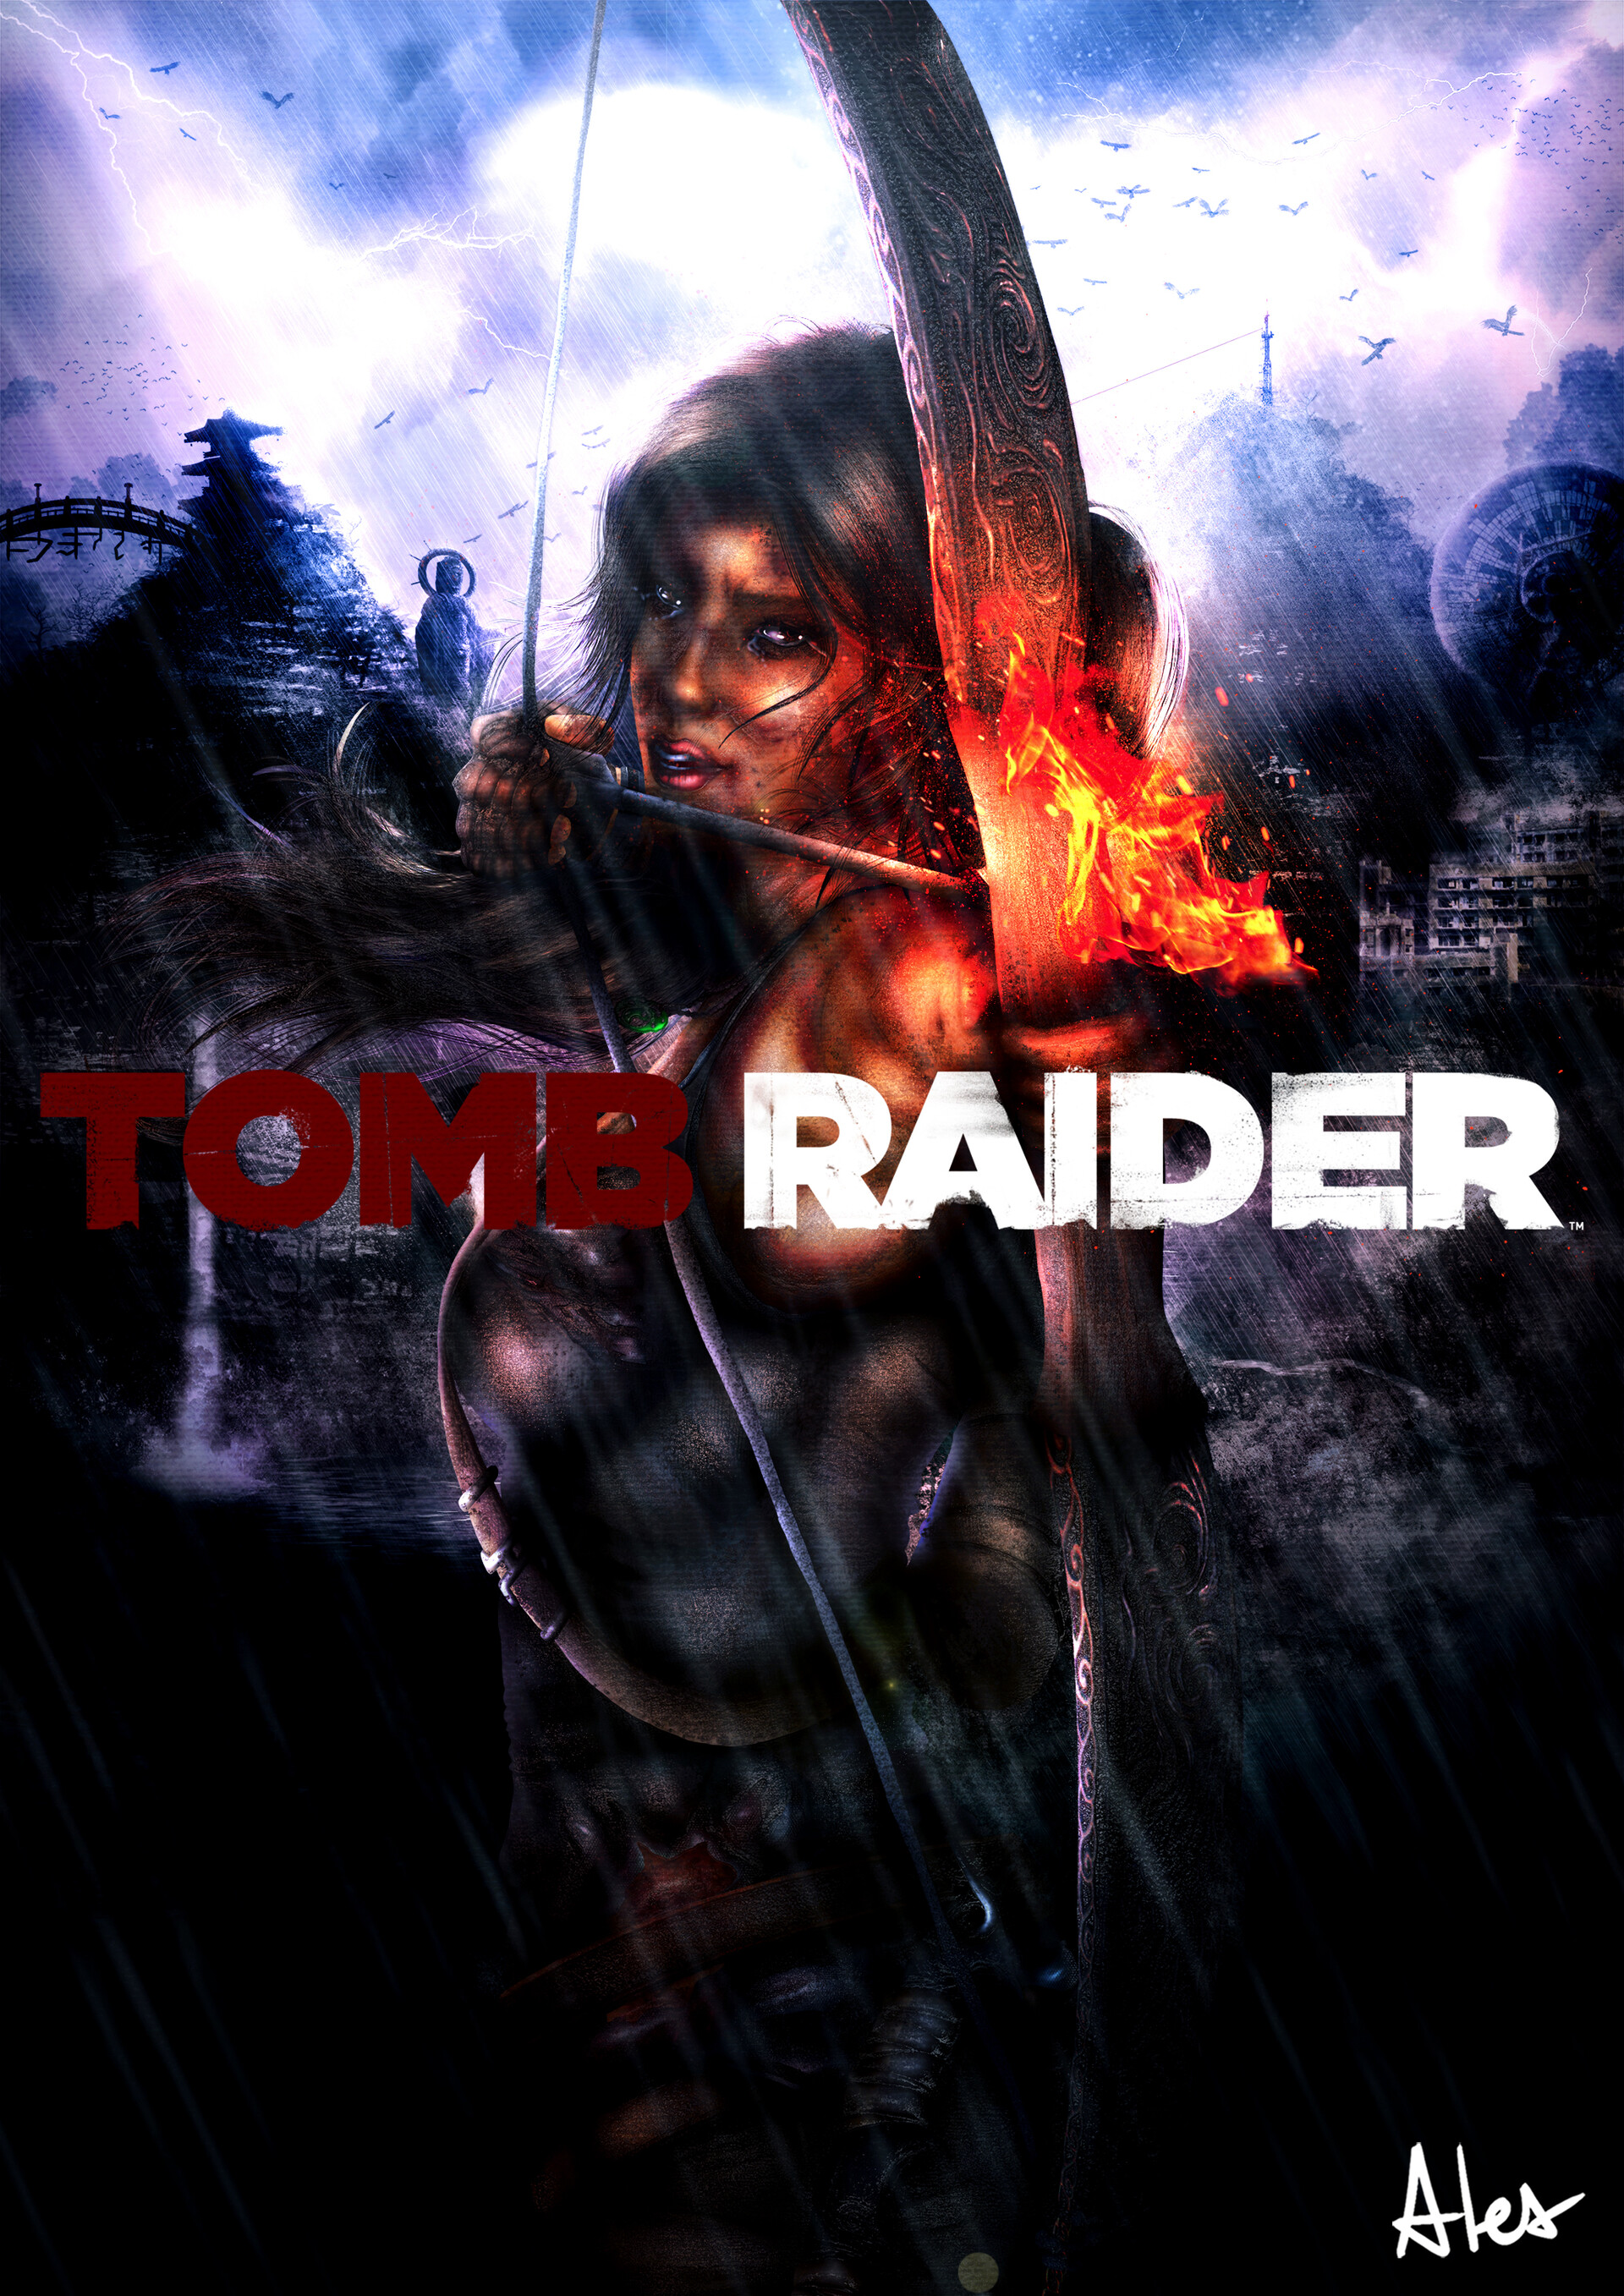 Shadow of the Tomb Raider fan art. The game may come out next year